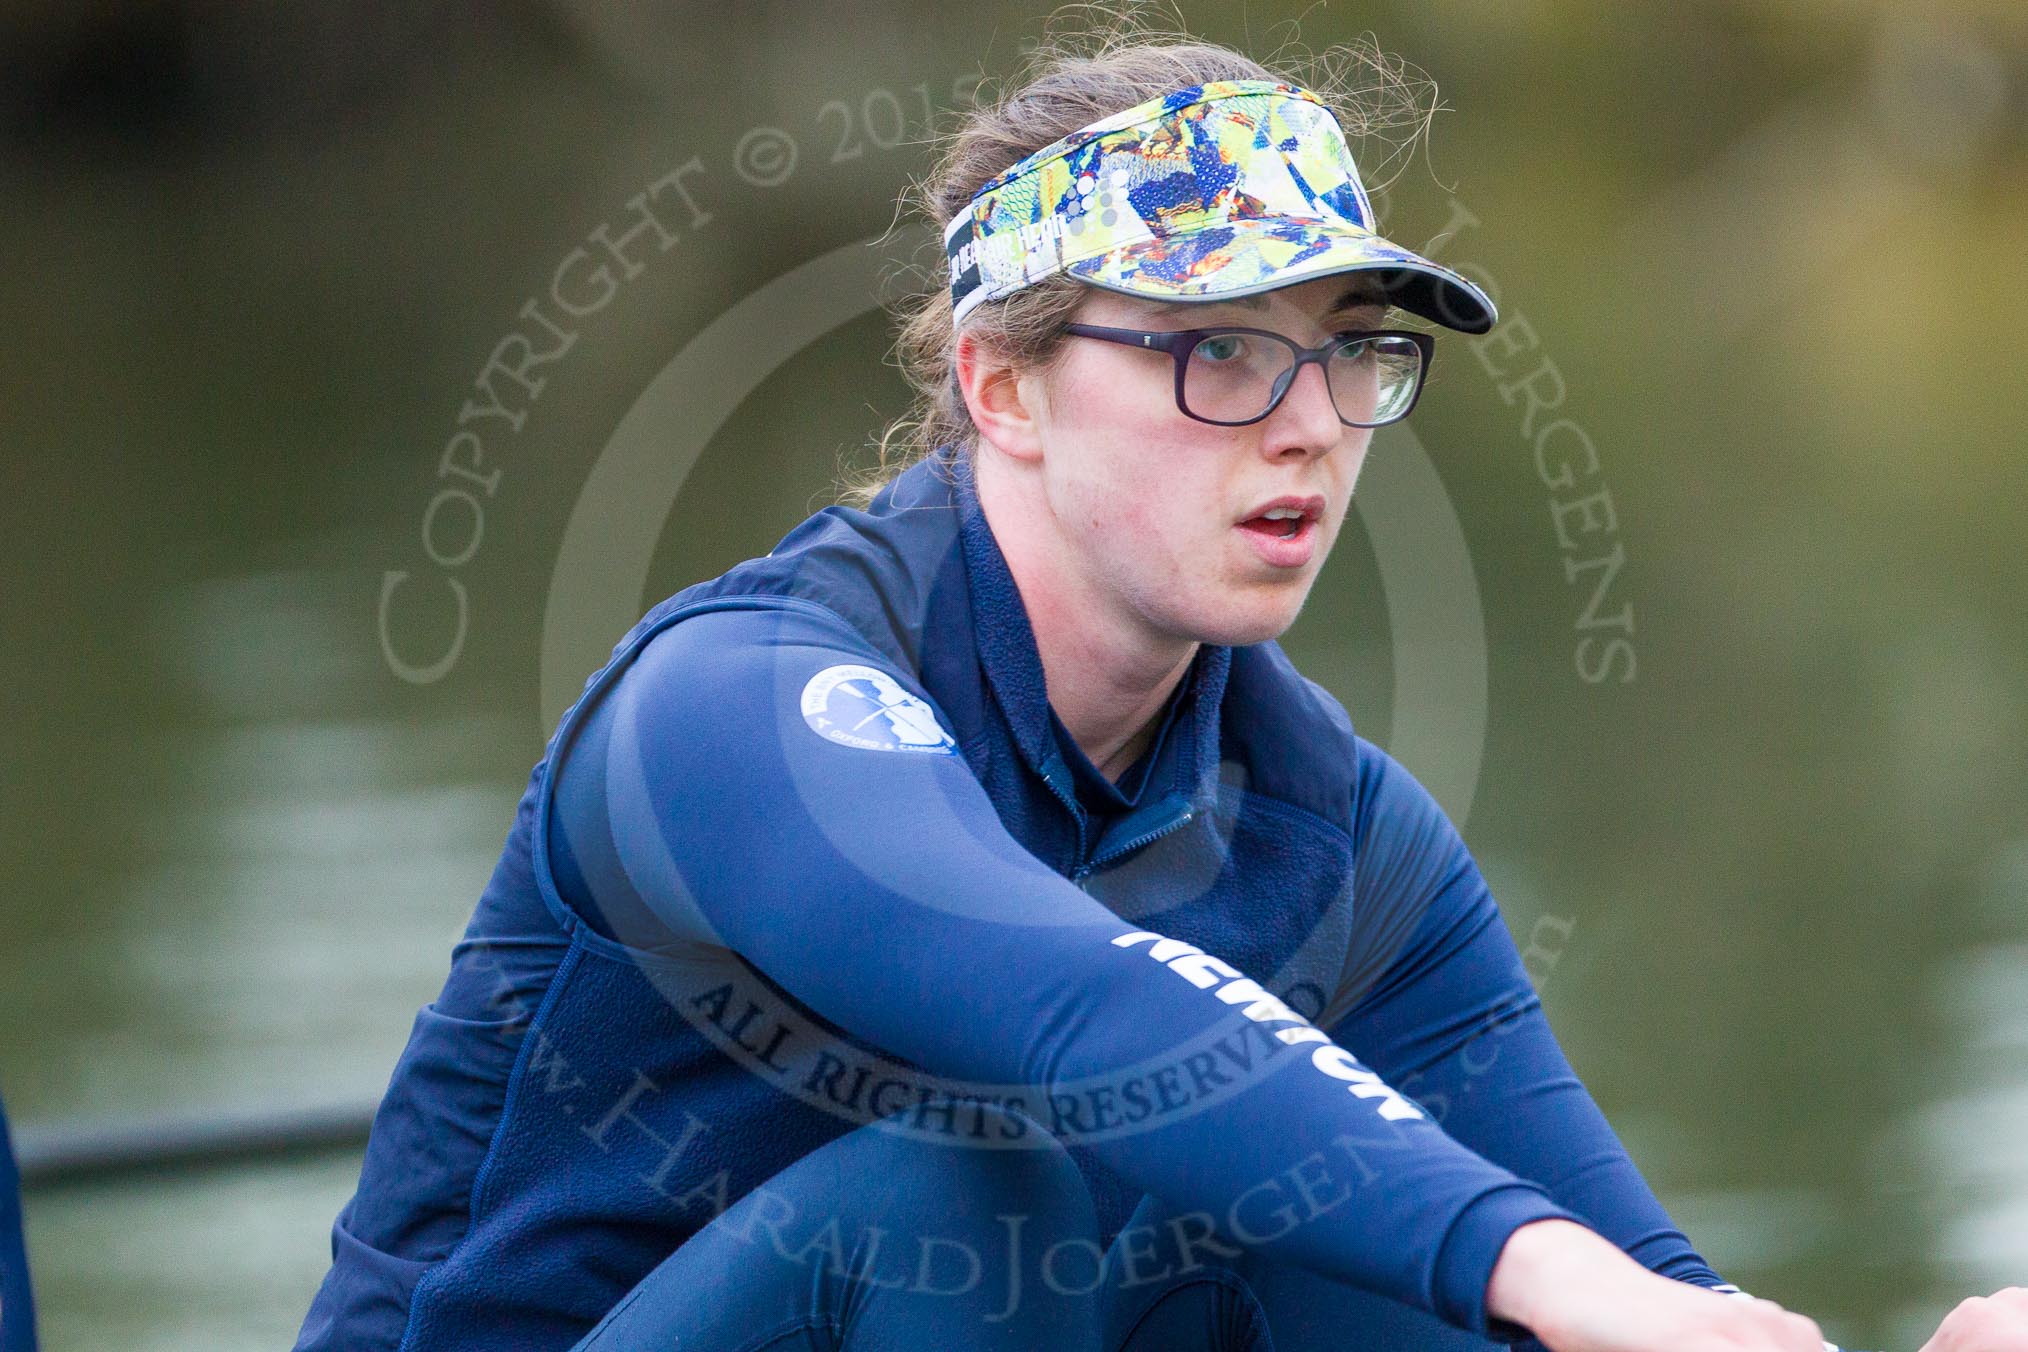 The Boat Race season 2016 - OUWBC training Wallingford: Ruth Siddorn, 4 seat in the OUWBC Blue Boat.
River Thames,
Wallingford,
Oxfordshire,

on 29 February 2016 at 16:28, image #111